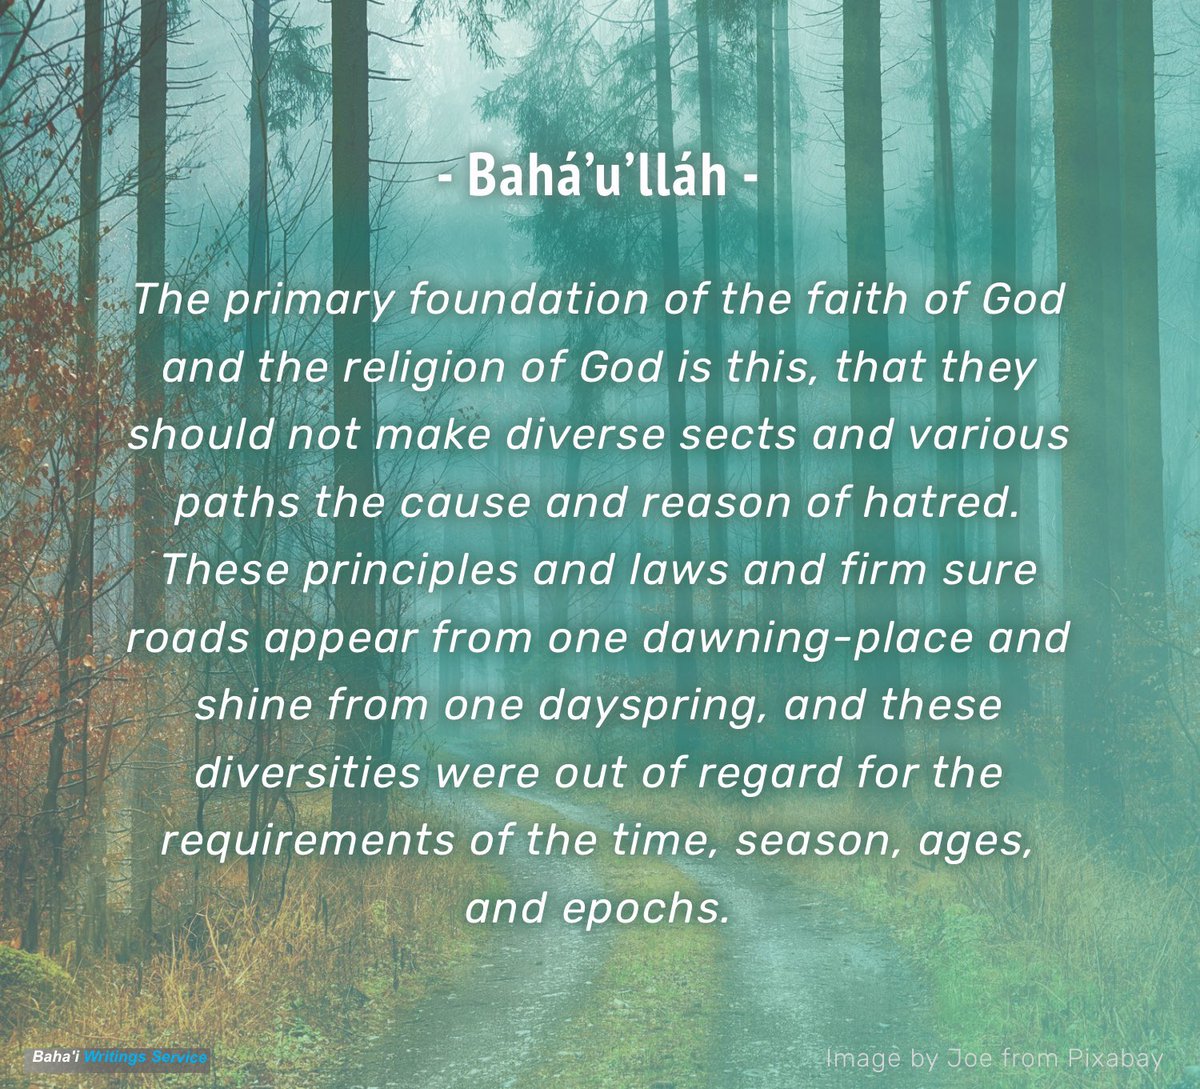 The primary foundation of the faith of God and the religion of God is this, that they should not make diverse sects and various paths the cause and reason of hatred. …

Bahá’u’lláh, qtd. in, A Traveler’s Narrative, ‘Abdu’l‑Bahá
bahai.org/r/987076840
#bahai #quotes